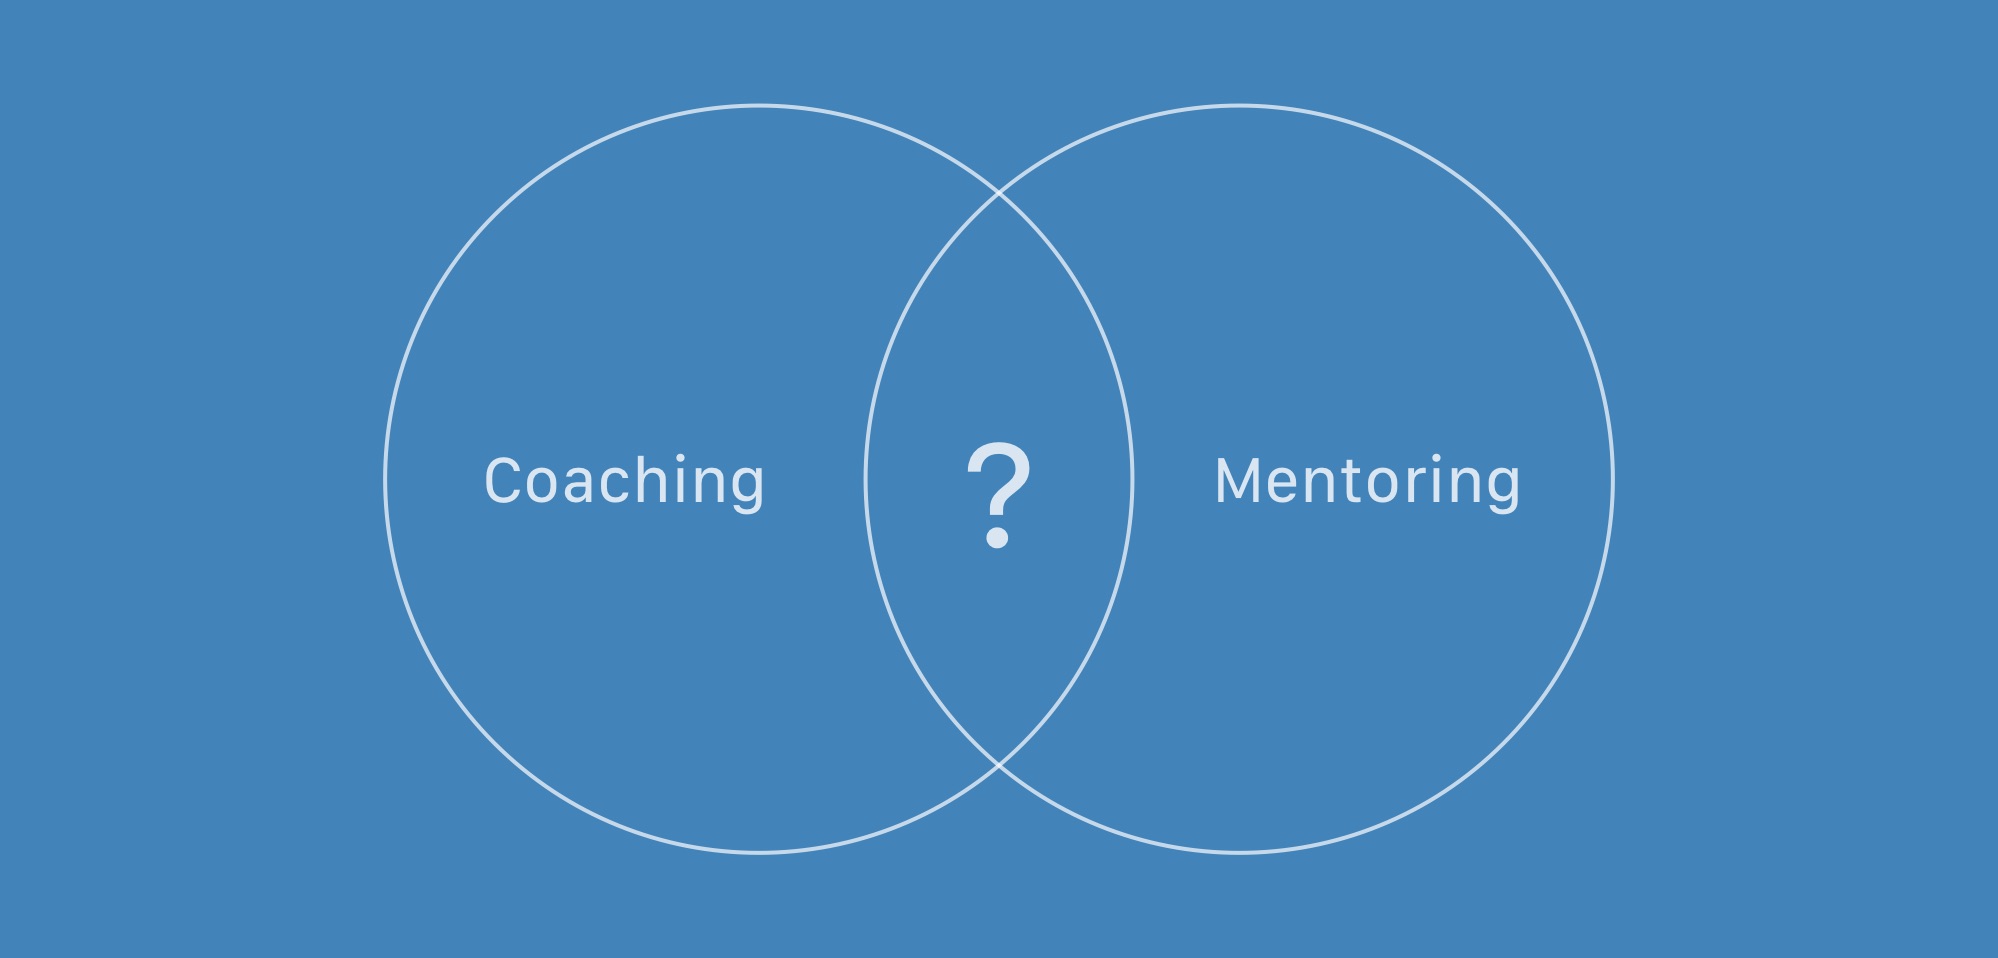 What’s the difference between Mentoring and Coaching and why does it matter?